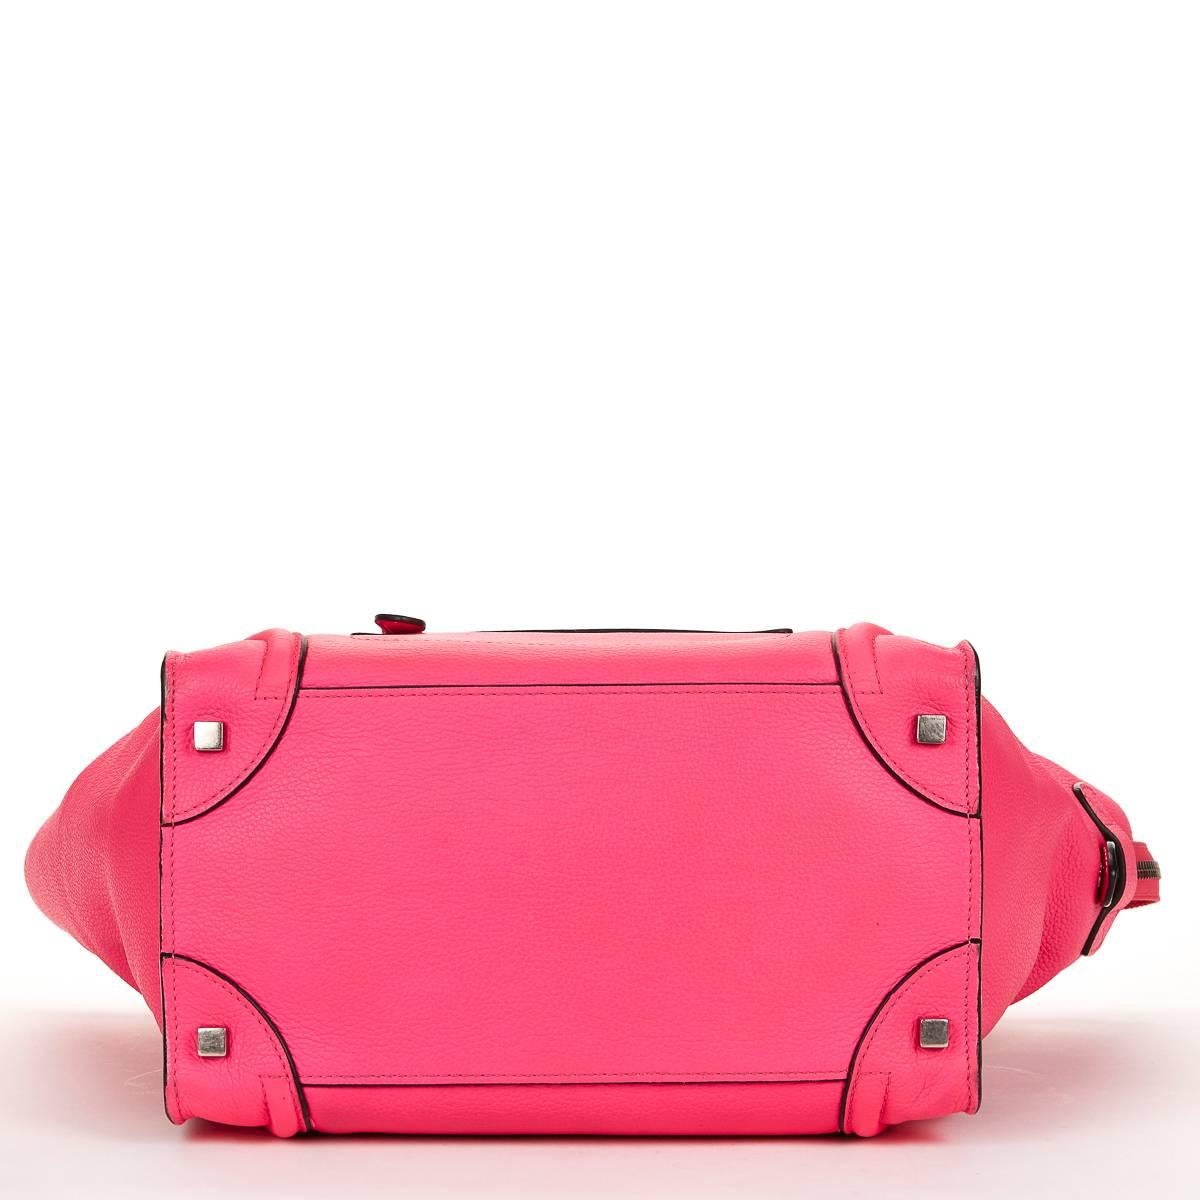 Women's 2010s Céline Neon Pink Drummed Leather Mini Luggage Tote